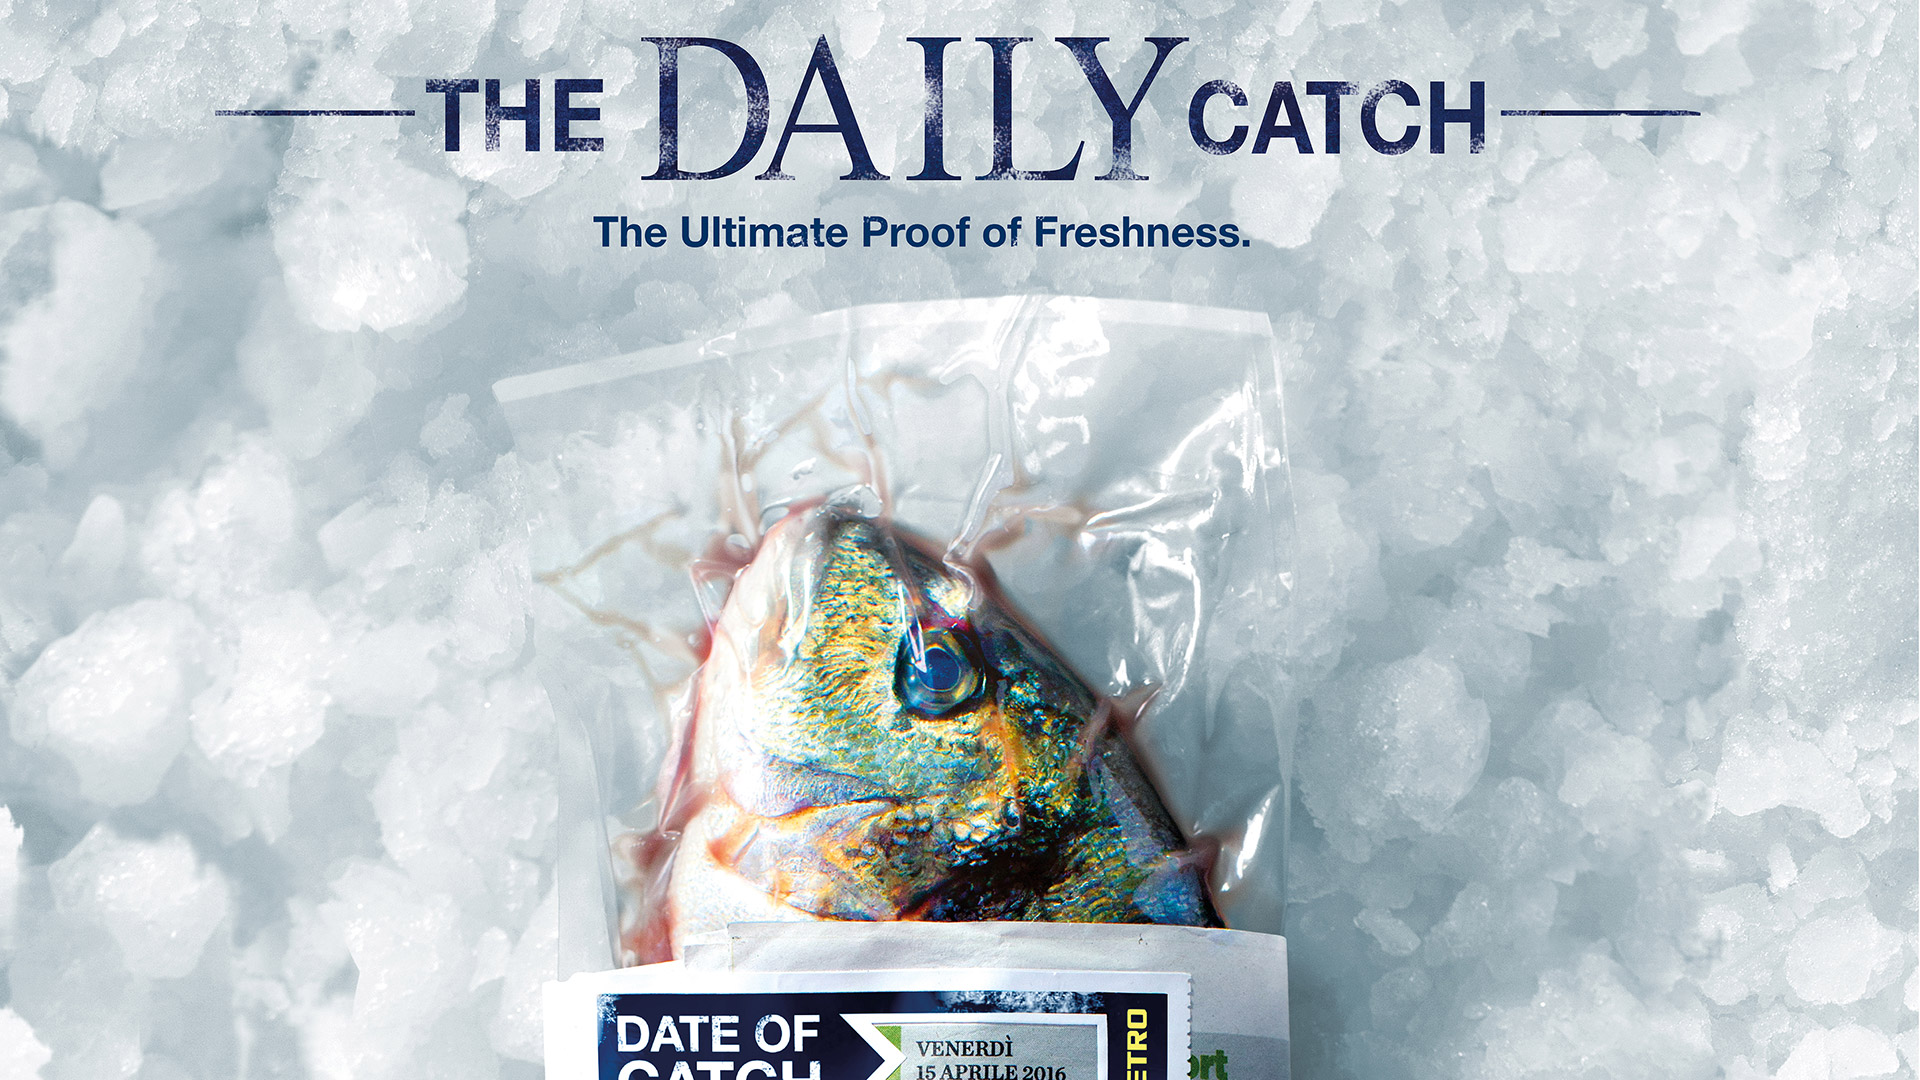 The Daily Catch